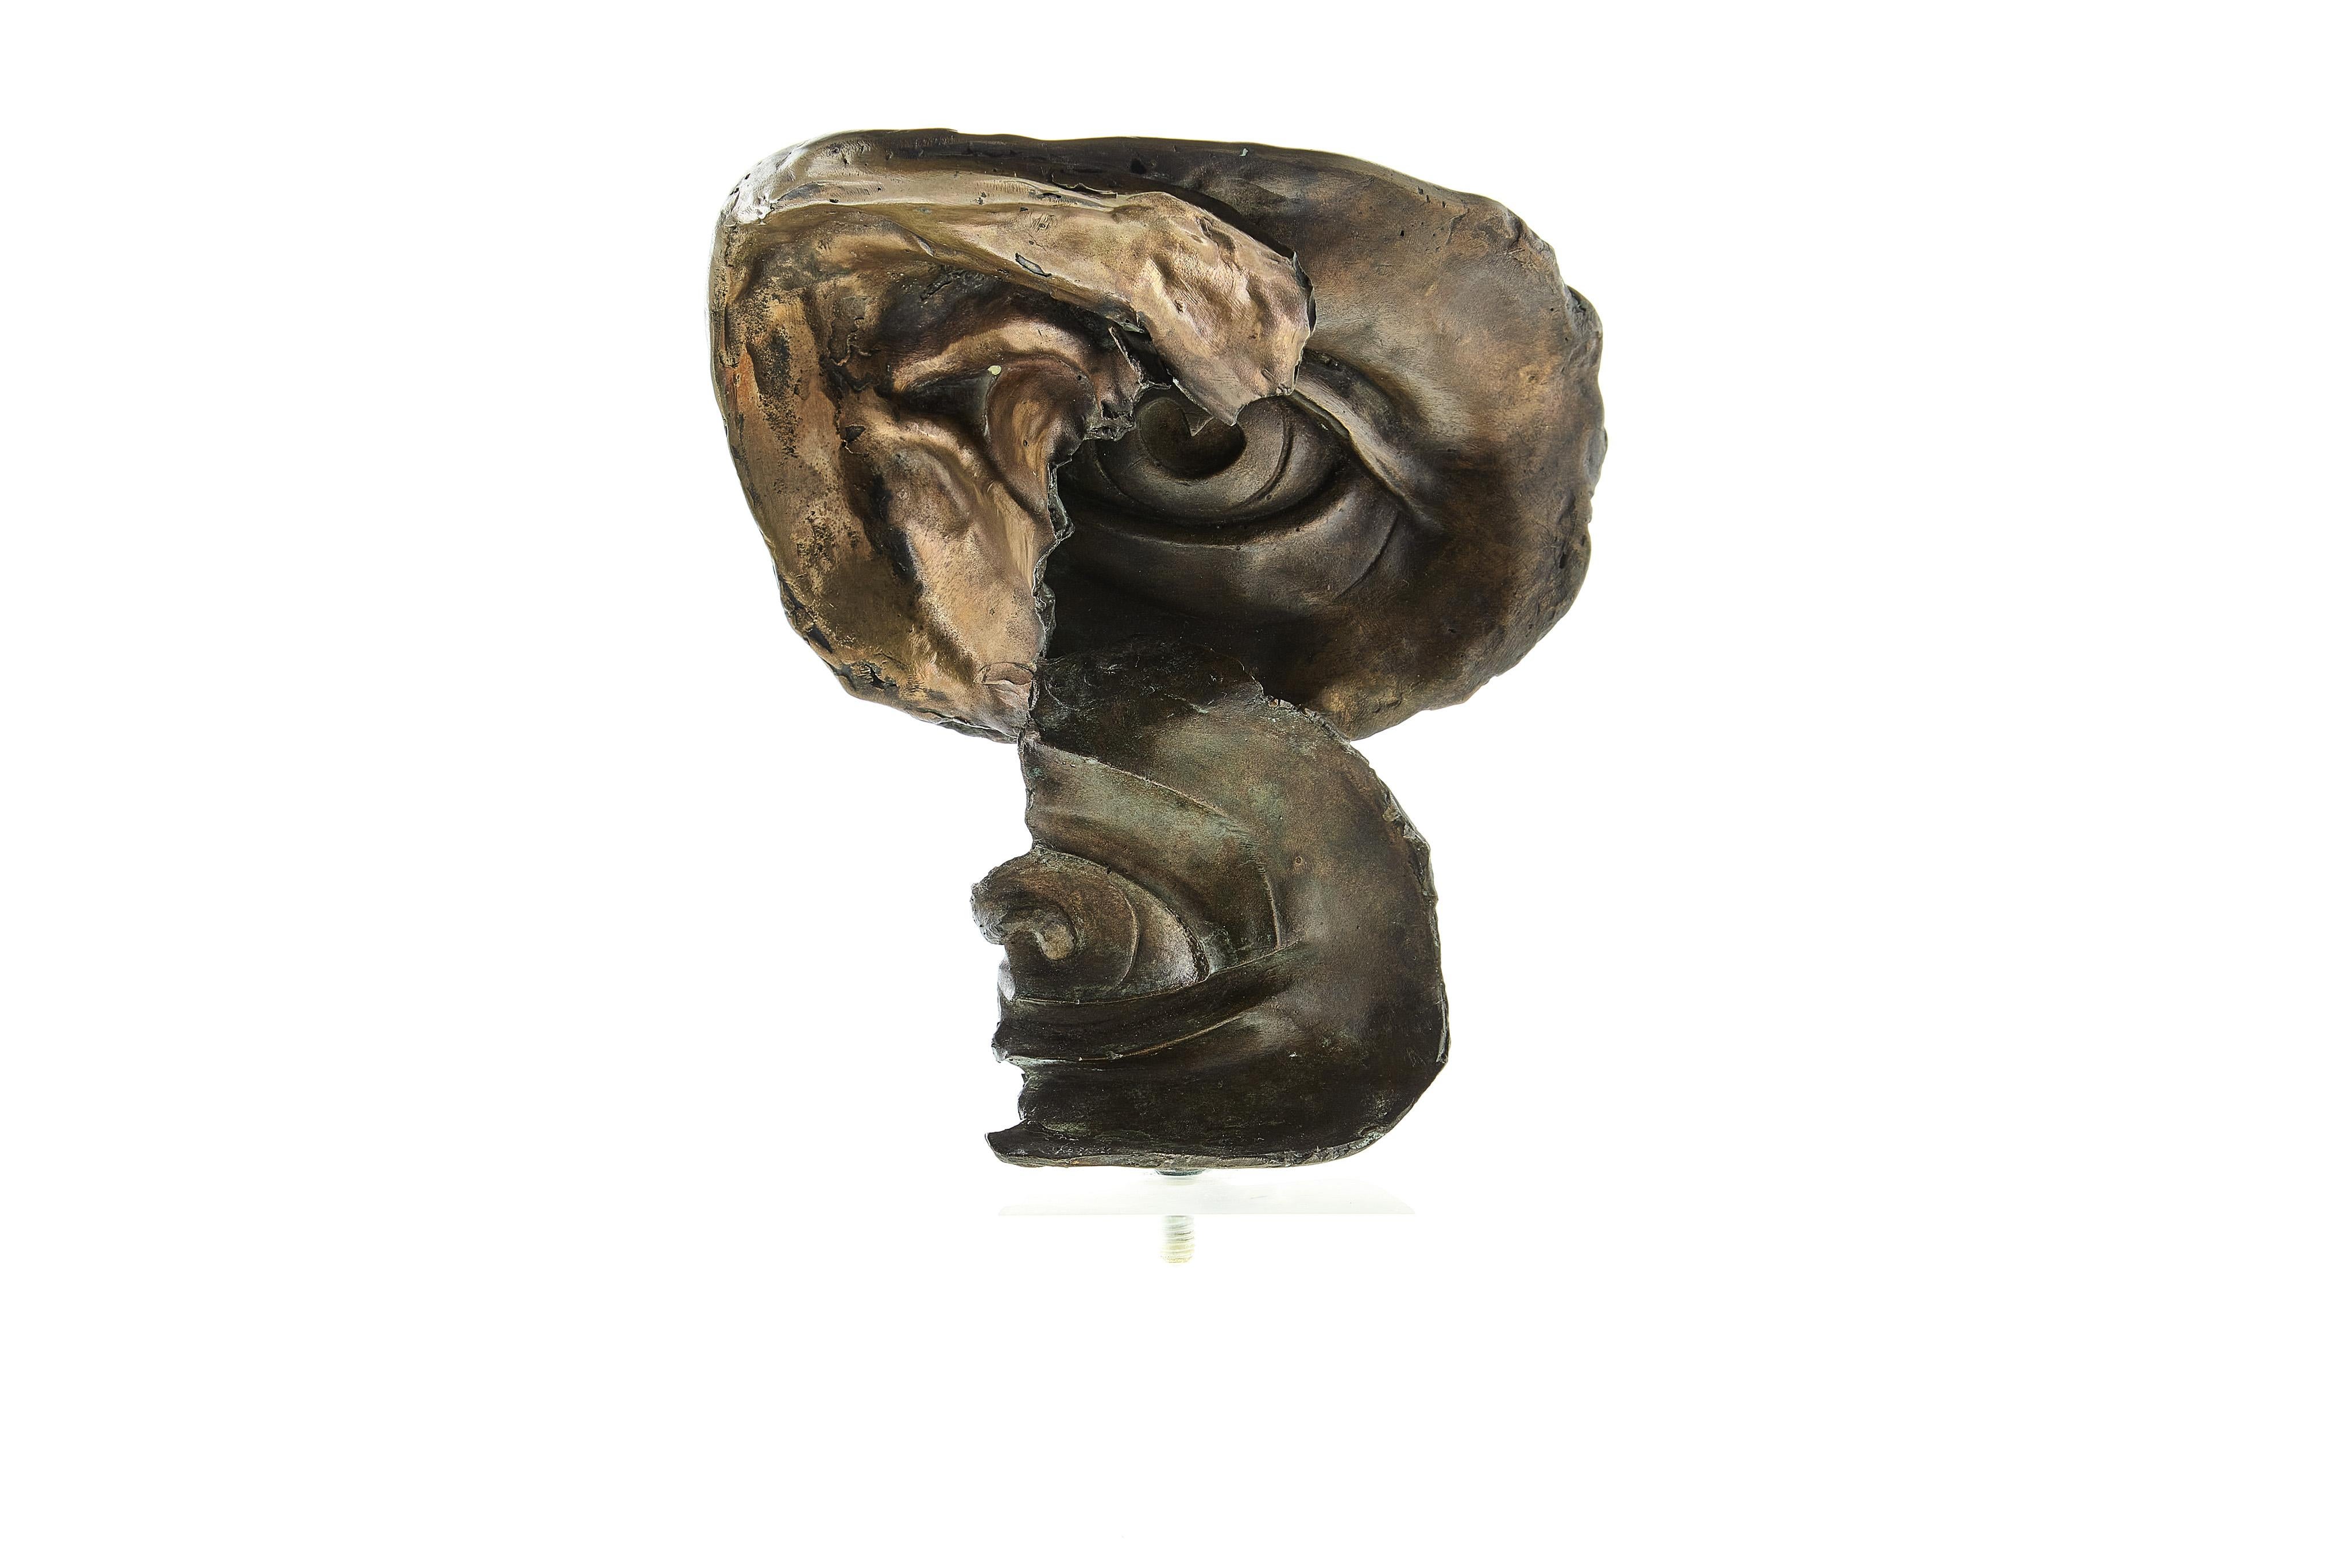 Surrealist bronze on Lucite base, signed 1992. Depicting a face folded over itself in an elegant yet very surreal manner.